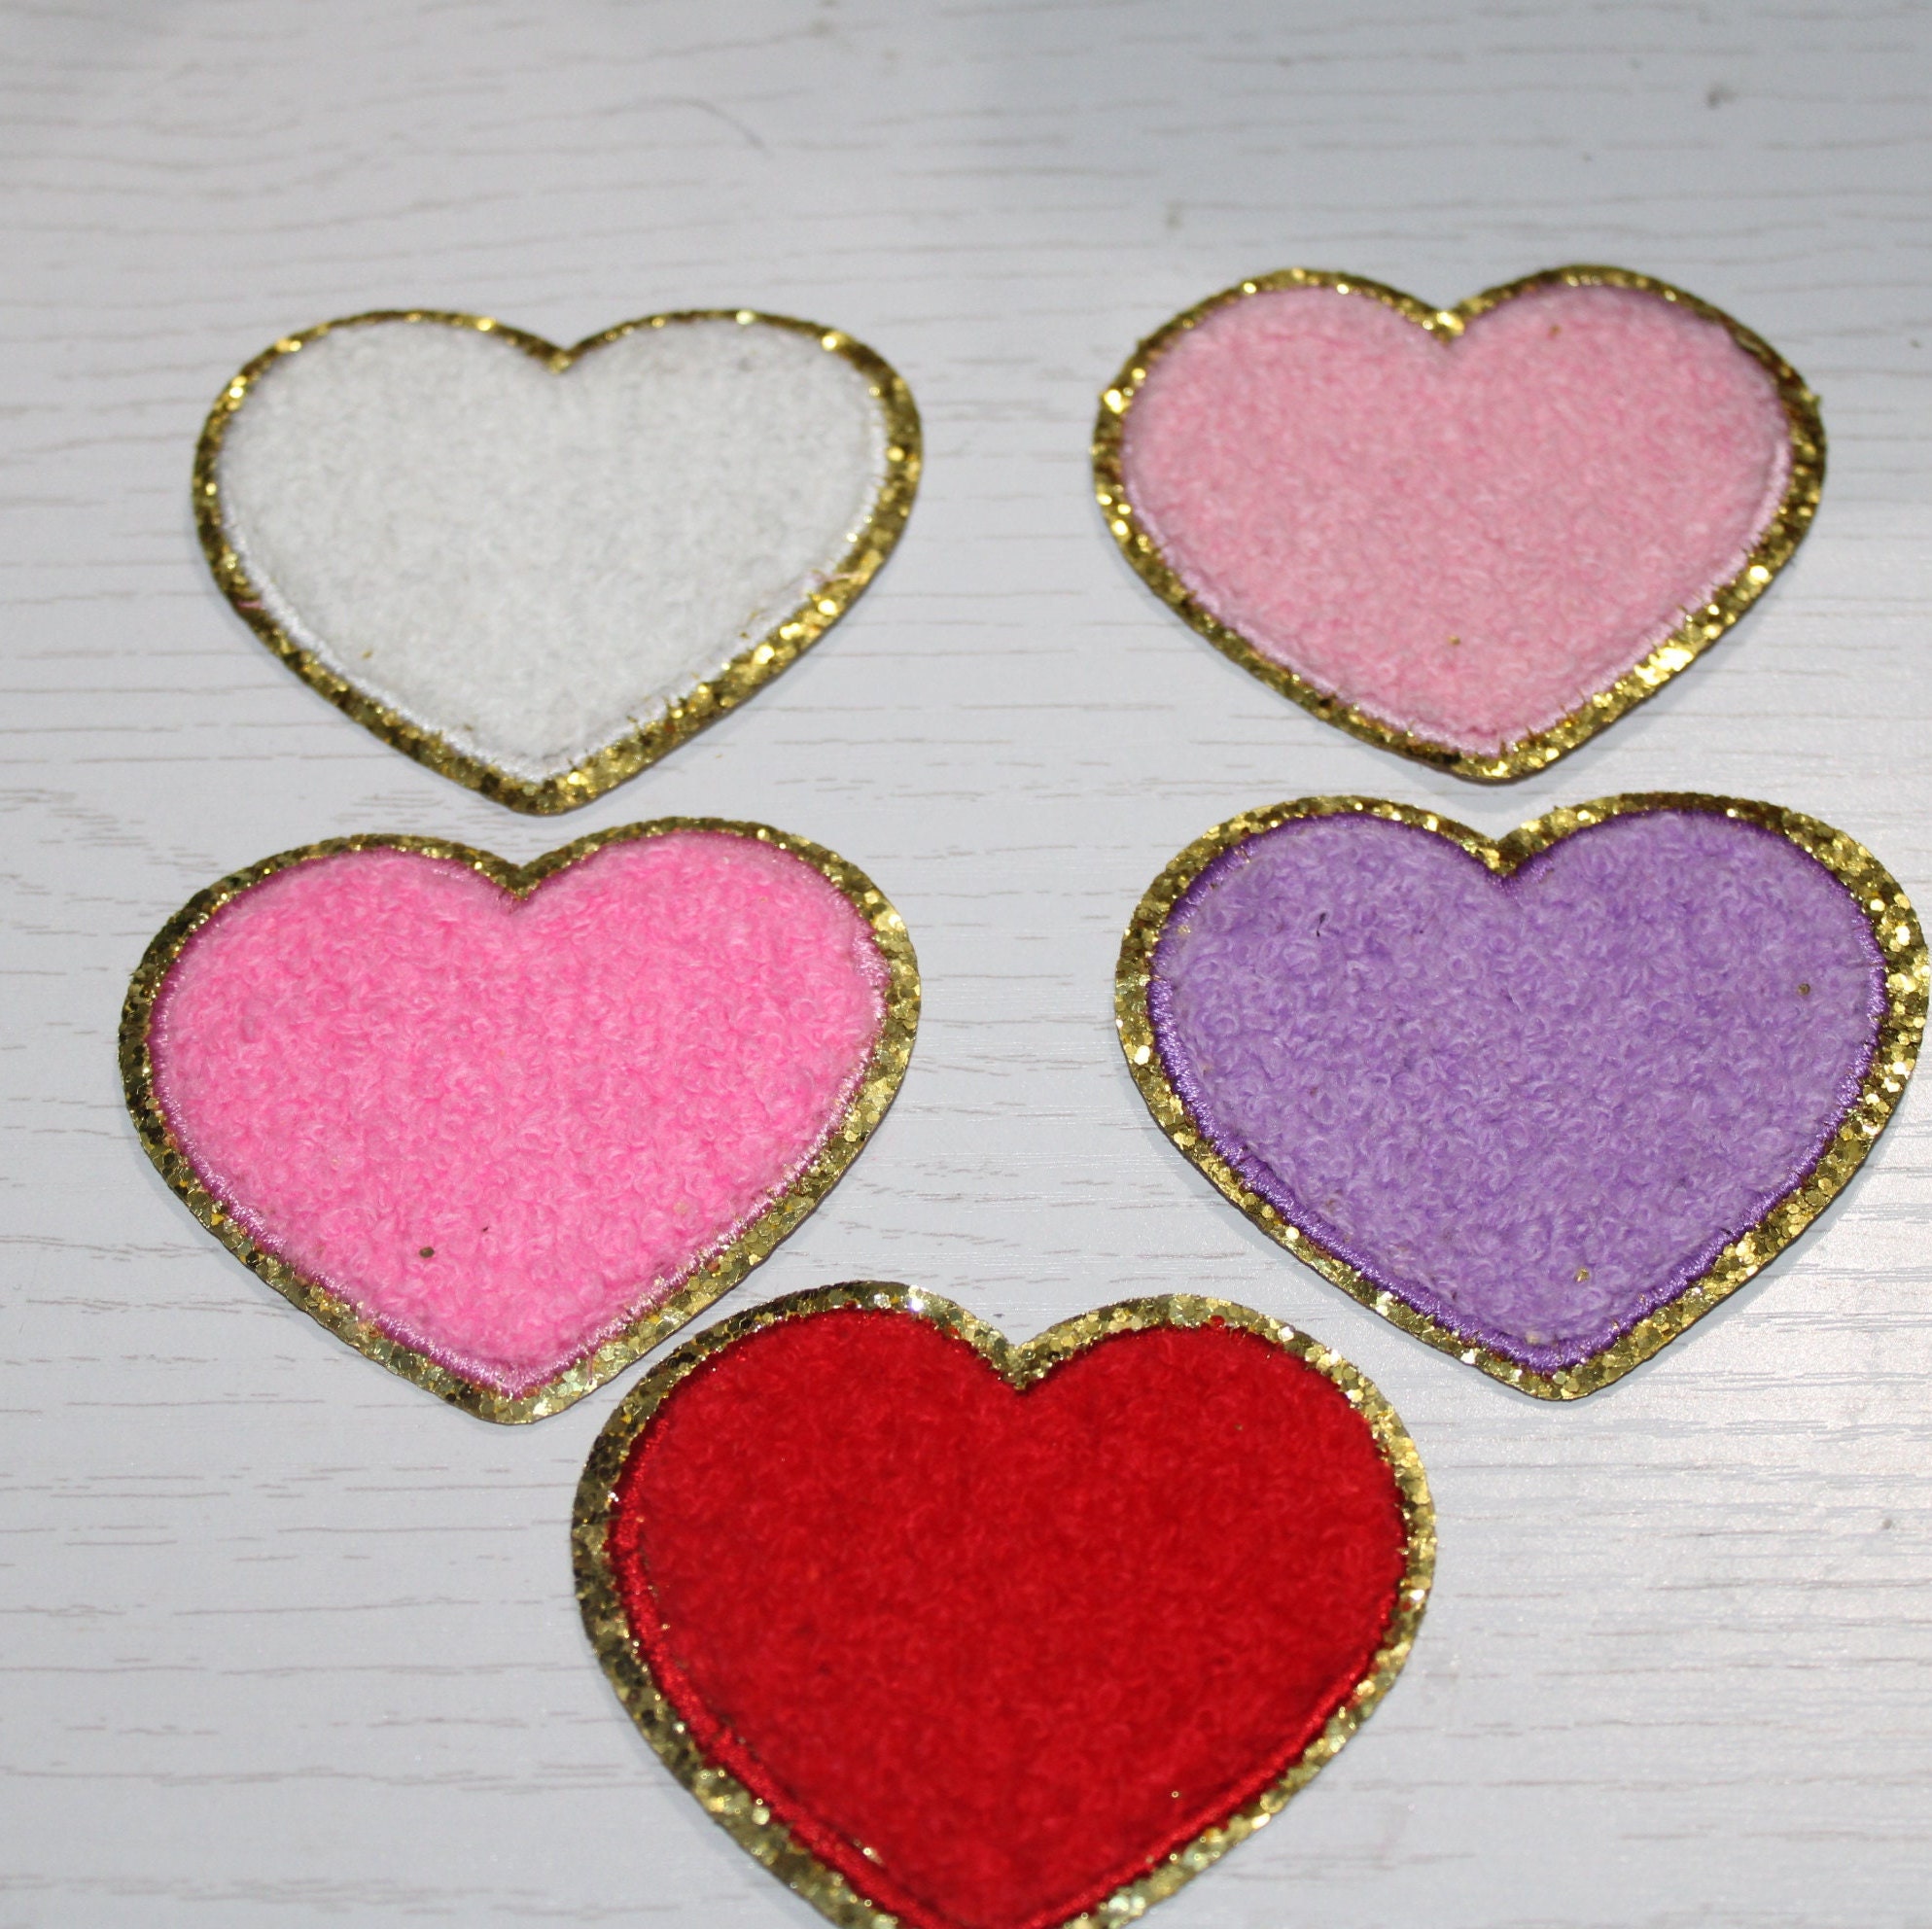 YUEHAO DIY Knitting DIY 8 Pieces Iron on Heart Shape Patches Embroidered  Repair Patches Iron love patch Red 